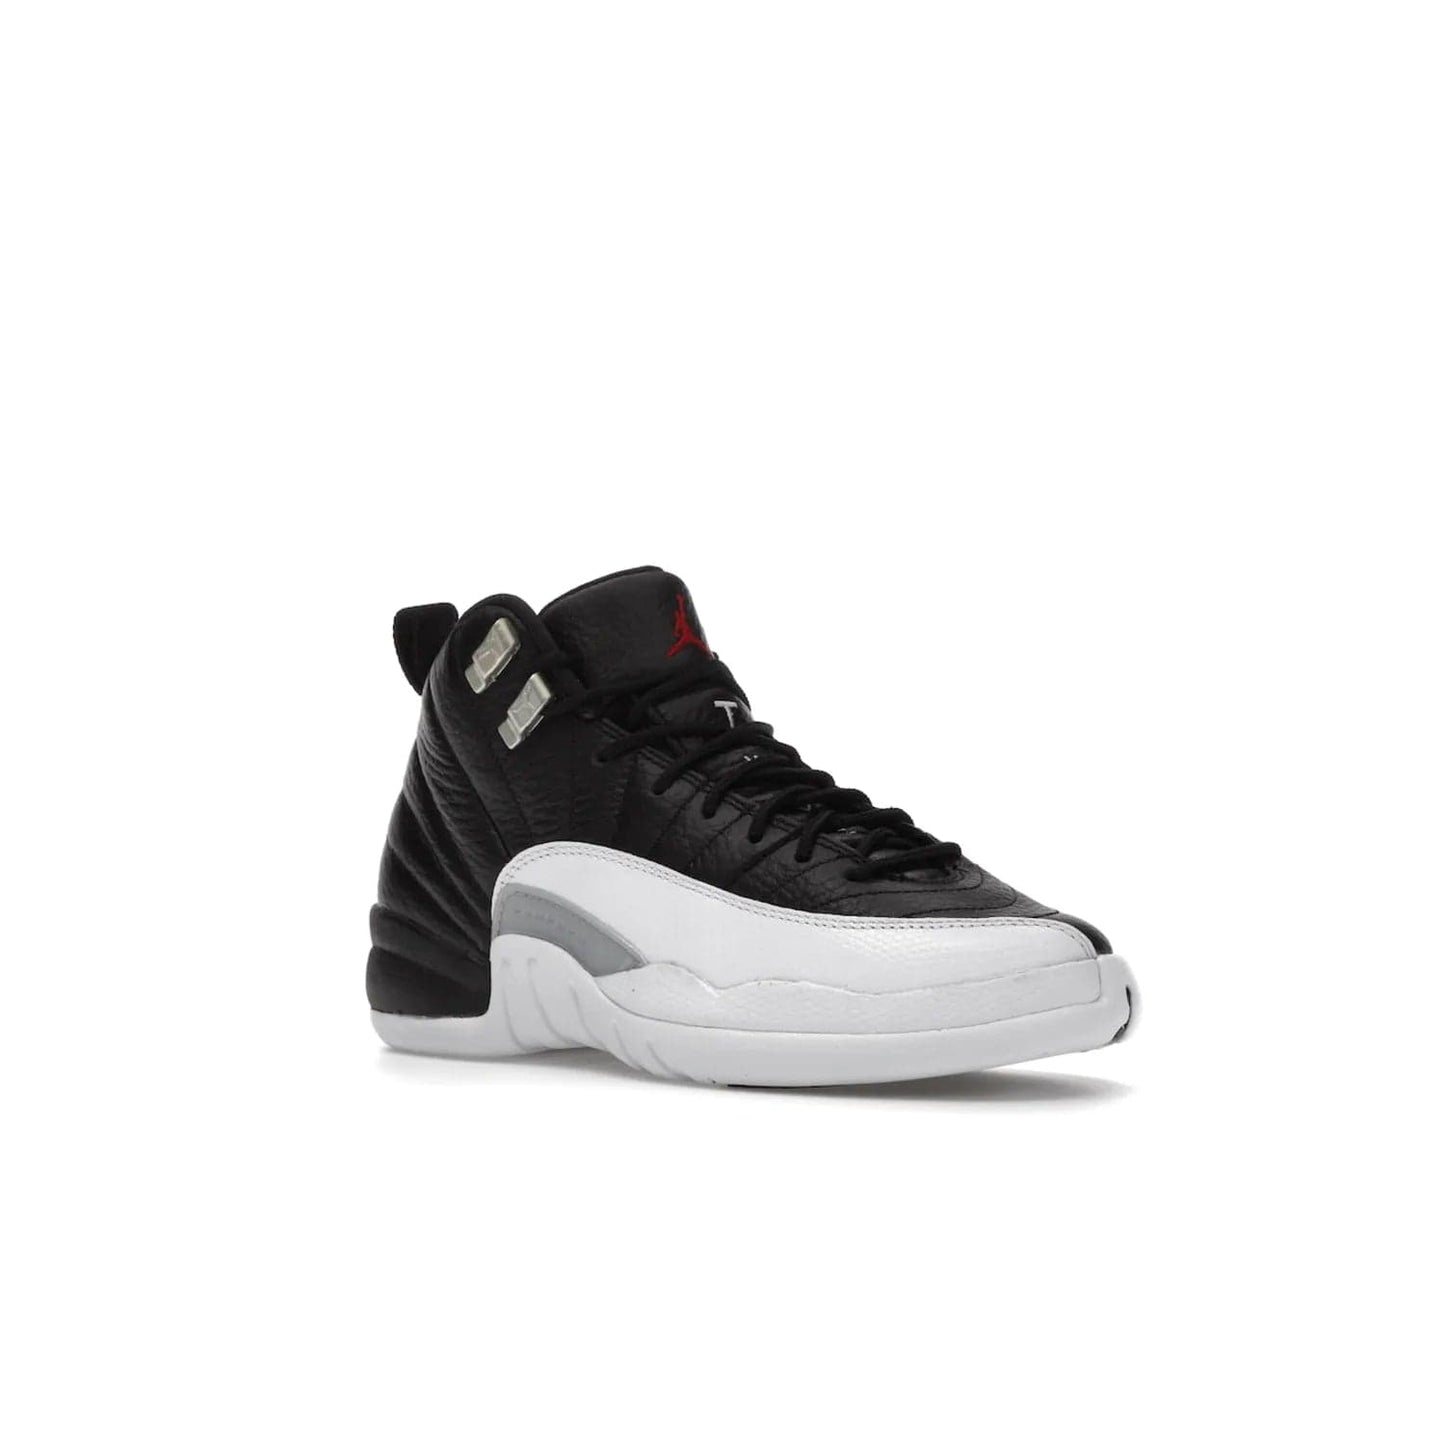 Jordan 12 Retro Playoffs (2022) (GS) - Image 5 - Only at www.BallersClubKickz.com - Air Jordan 12 Retro Playoffs GS 2022 for active young athletes. Comfort and style in a combination of black tumbled leather, white textured overlays and red/white/black outsole. Eye-catching details and signature carbon fiber shank plate.